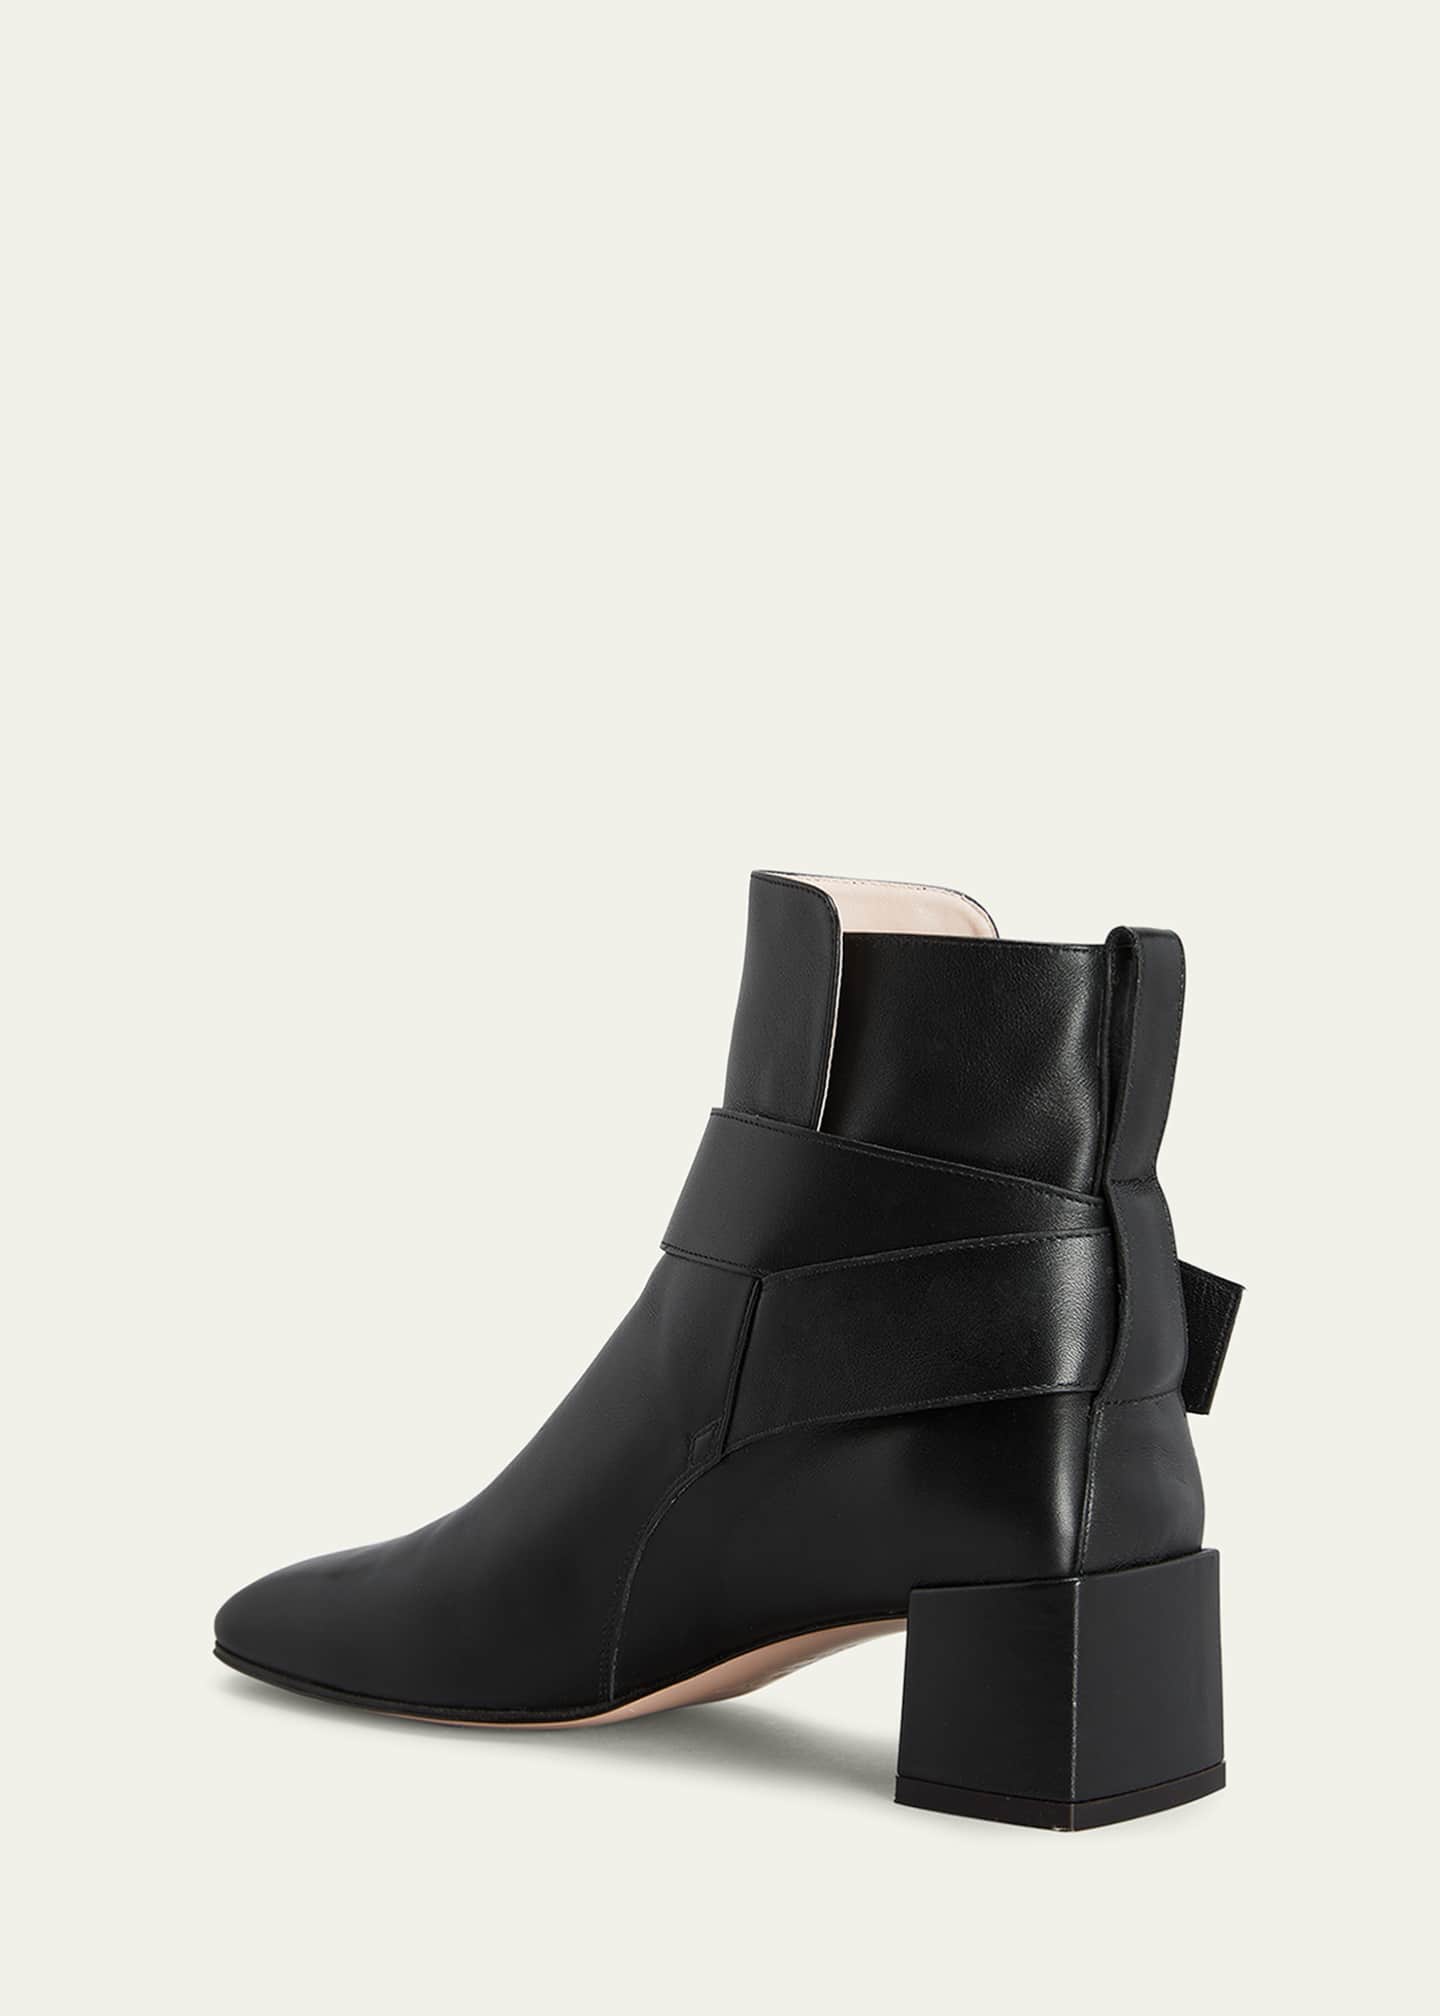 Roger Vivier City Leather Buckle Ankle Boots - Bergdorf Goodman